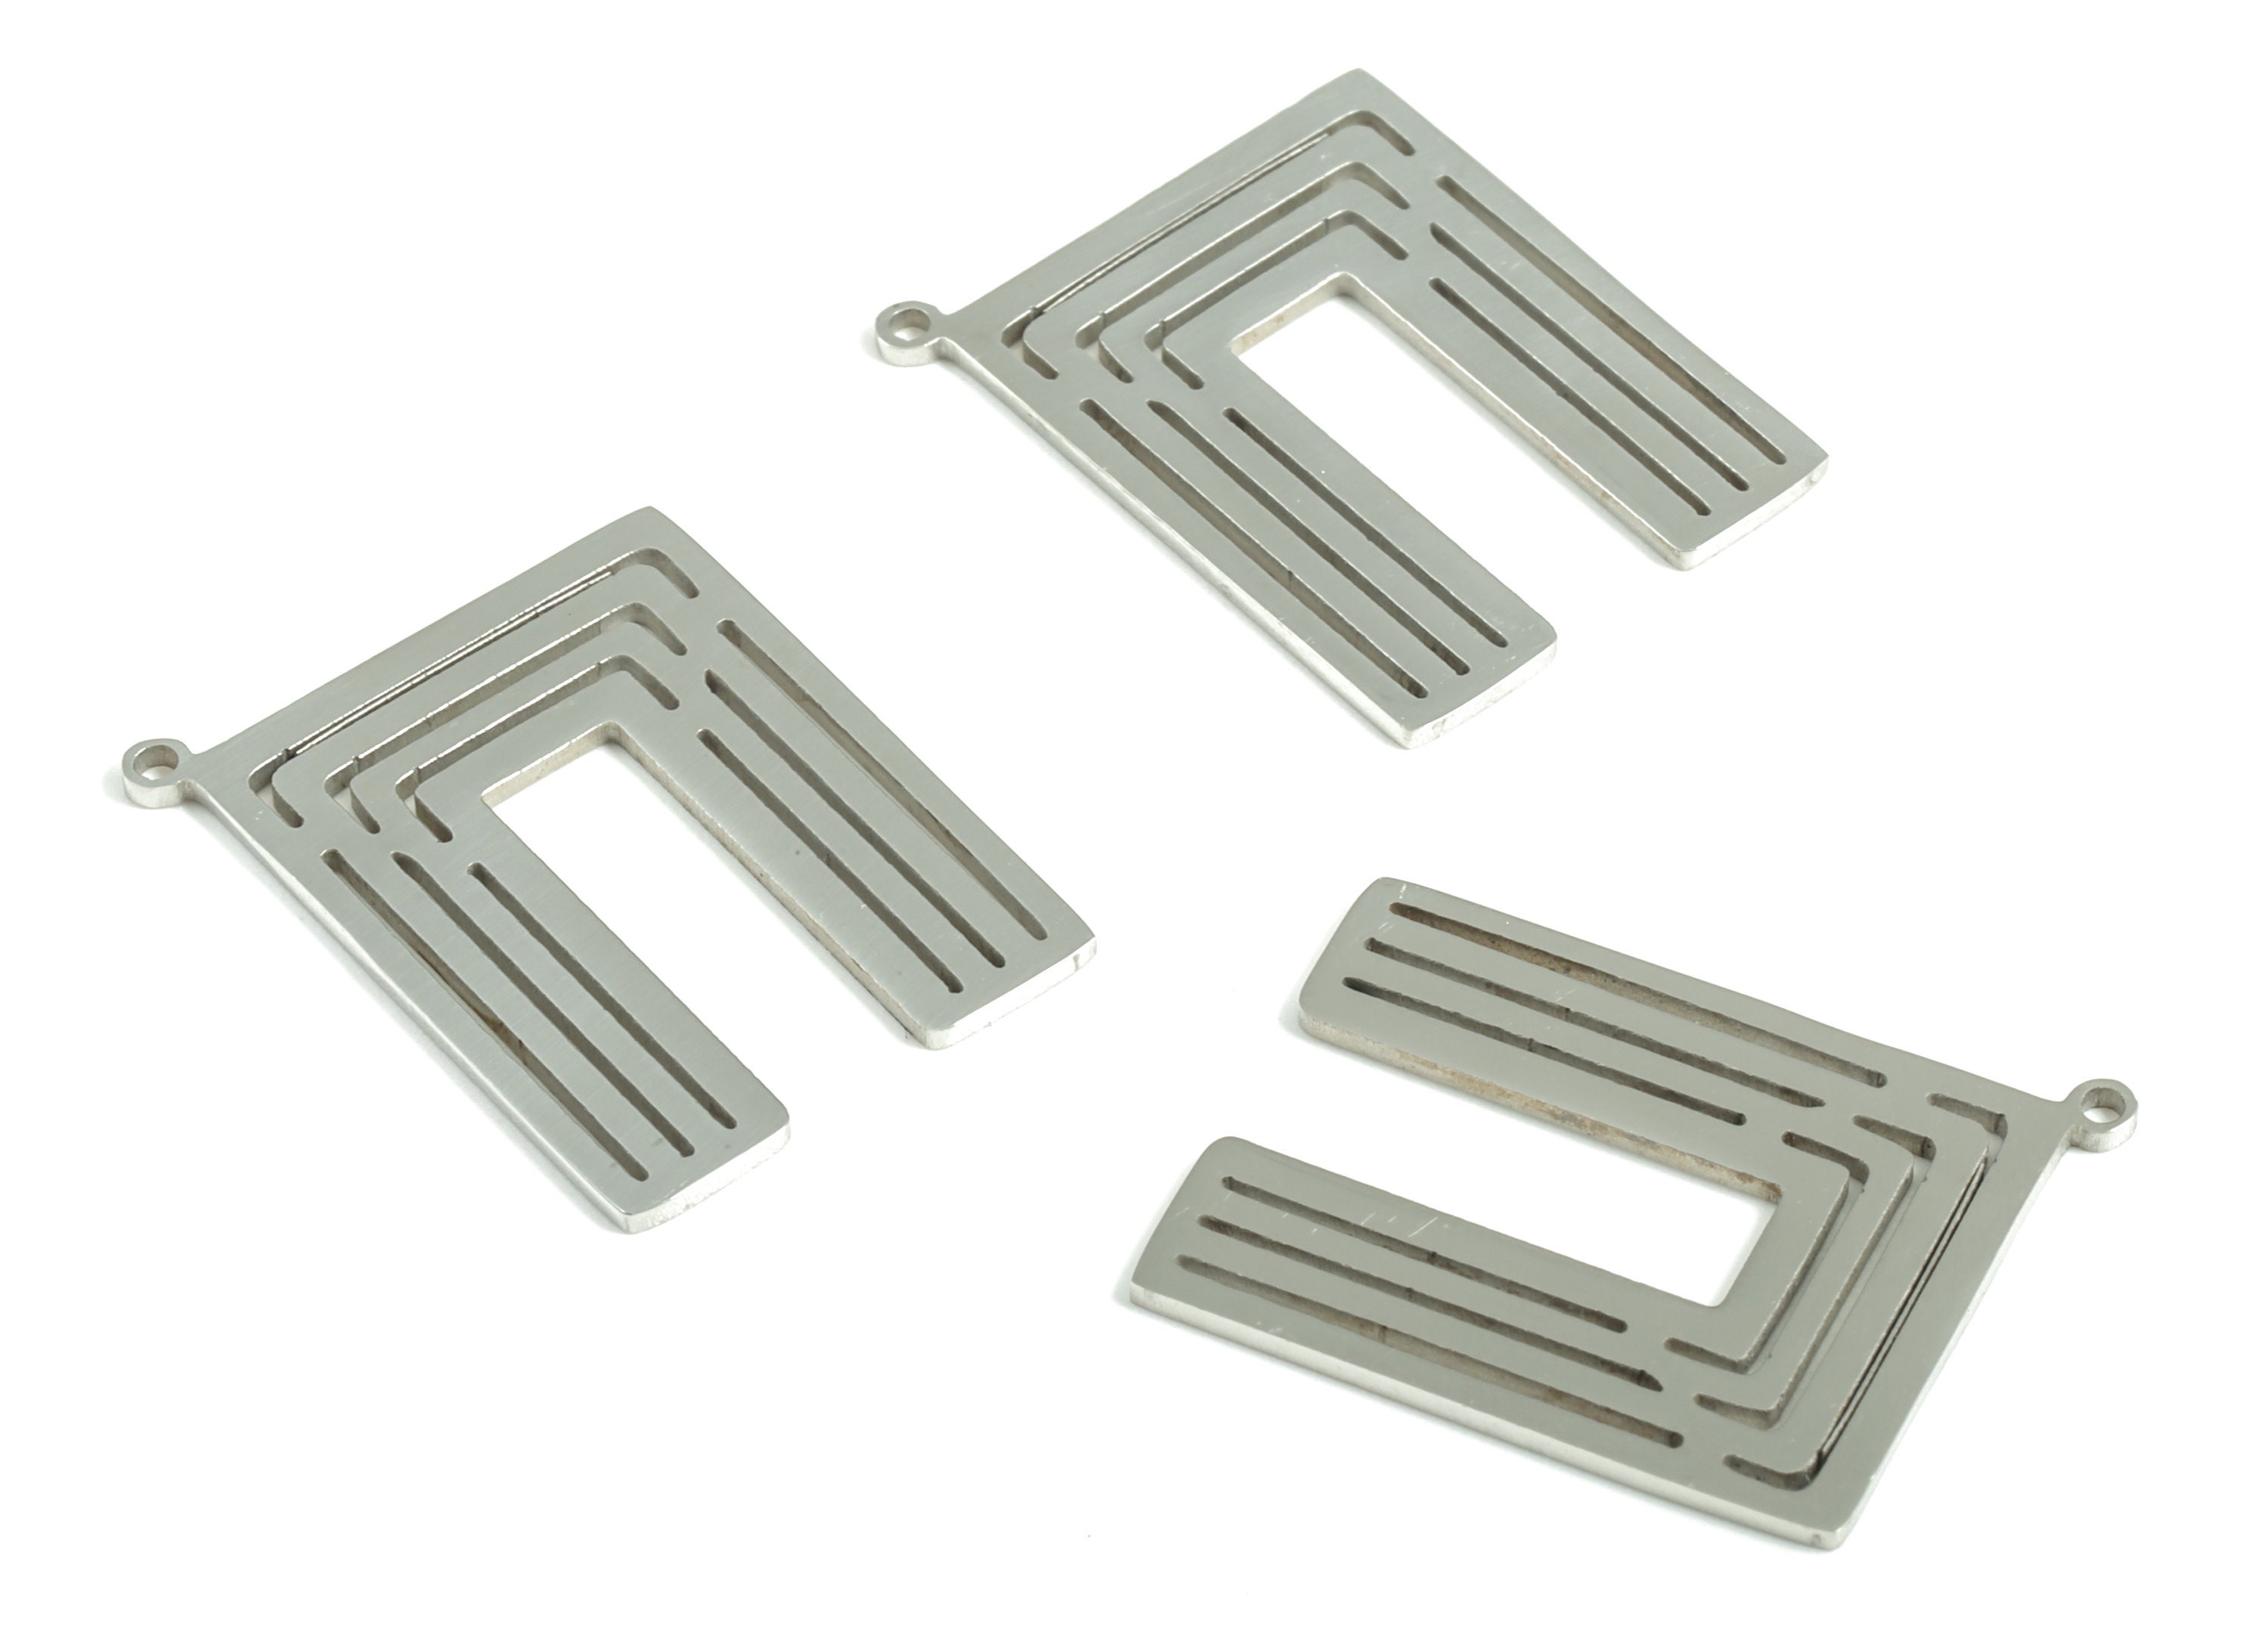 Stainless Steel Rectangle Pendant 26.39x19.25x1mm SS1193 Stainless Steel Rectangle Earring Charms Jewelry Making Supplies